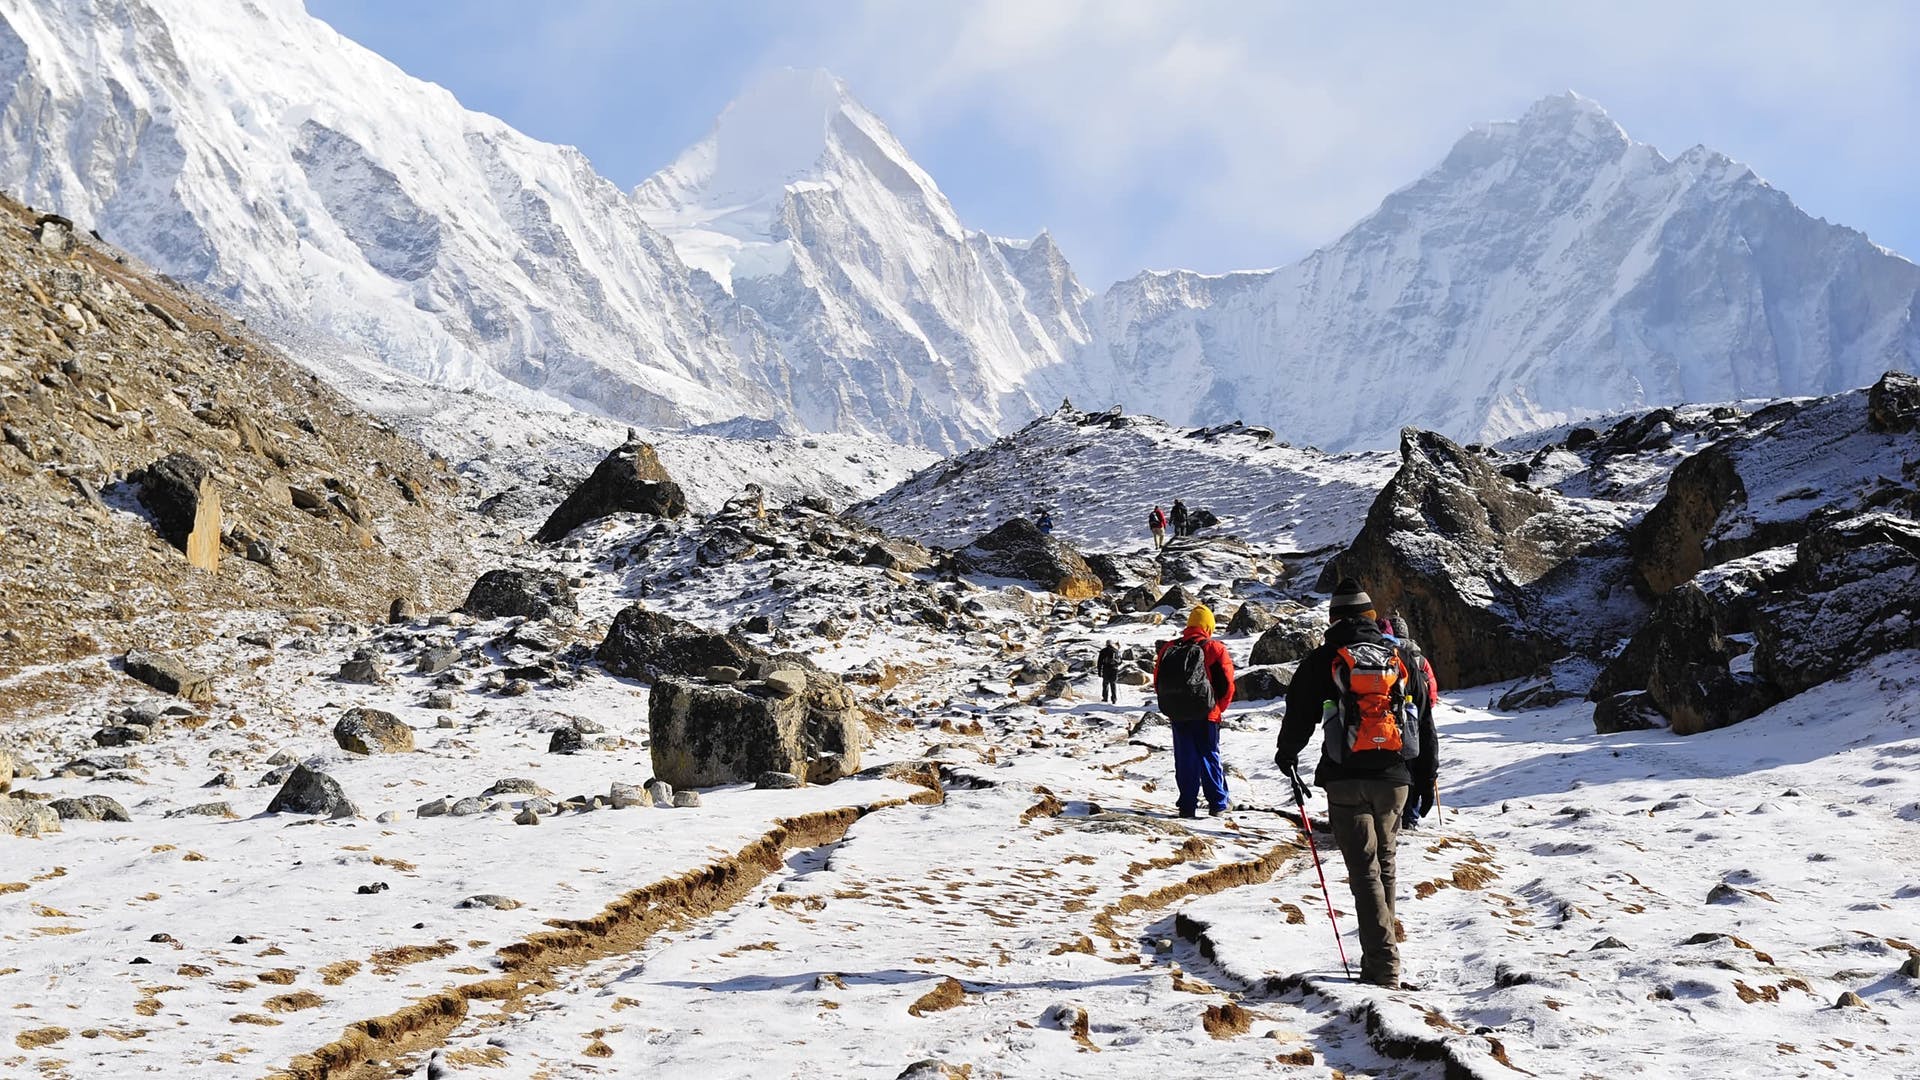 A group of hikers makes their way to Everest Base Camp, in the stunning Himalayas.